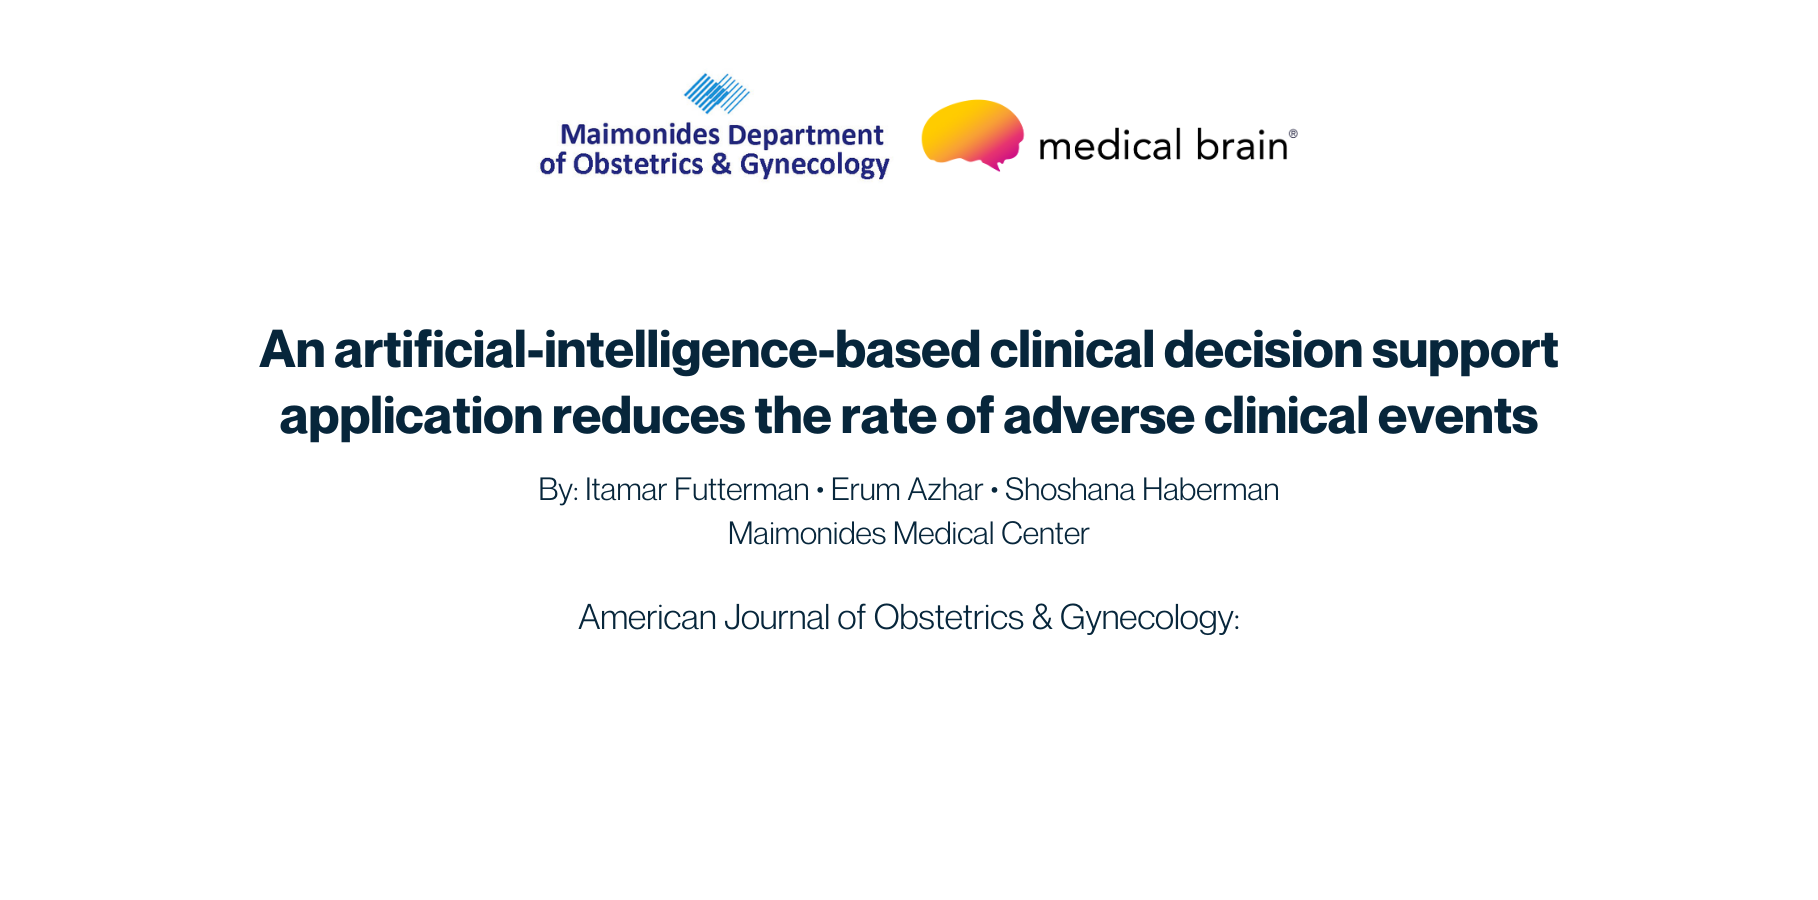 Using the Medical Brain, Clinicians Dramatically Reduced Adverse Obstetrical Events by 90.7%